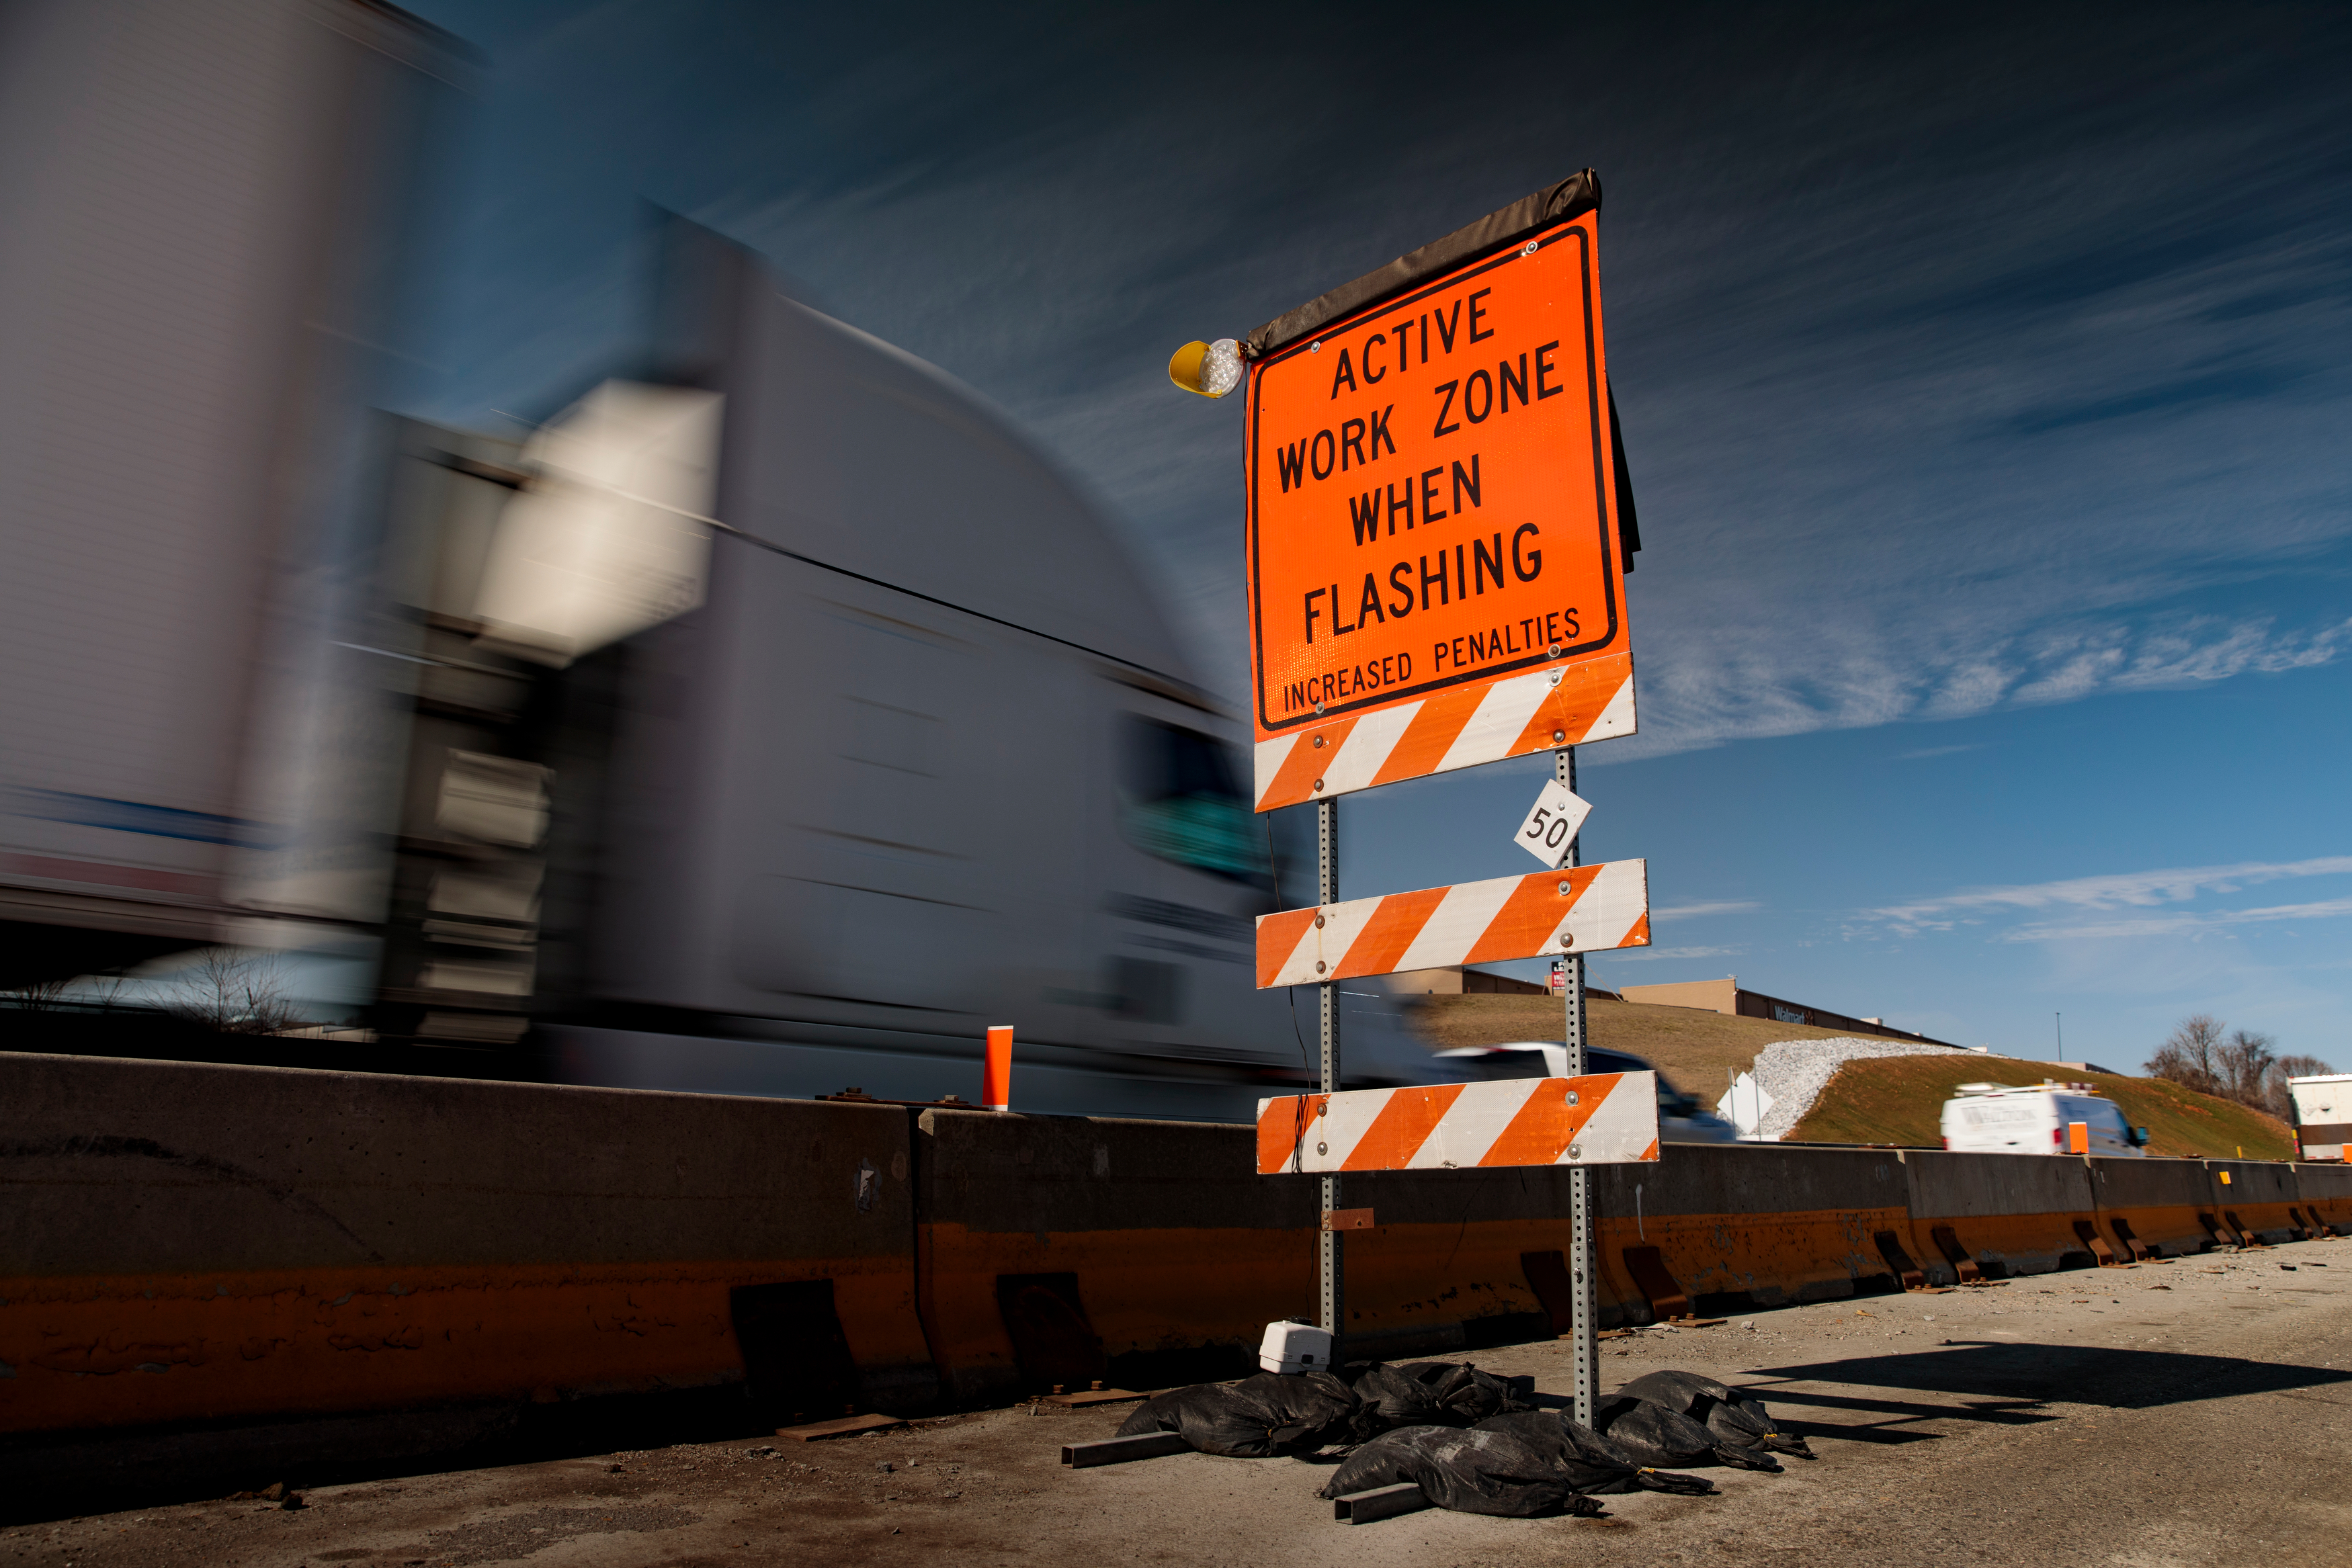 Truck passing a work zone sign that reads "Active Work Zone When Flashing Increased Penalties"